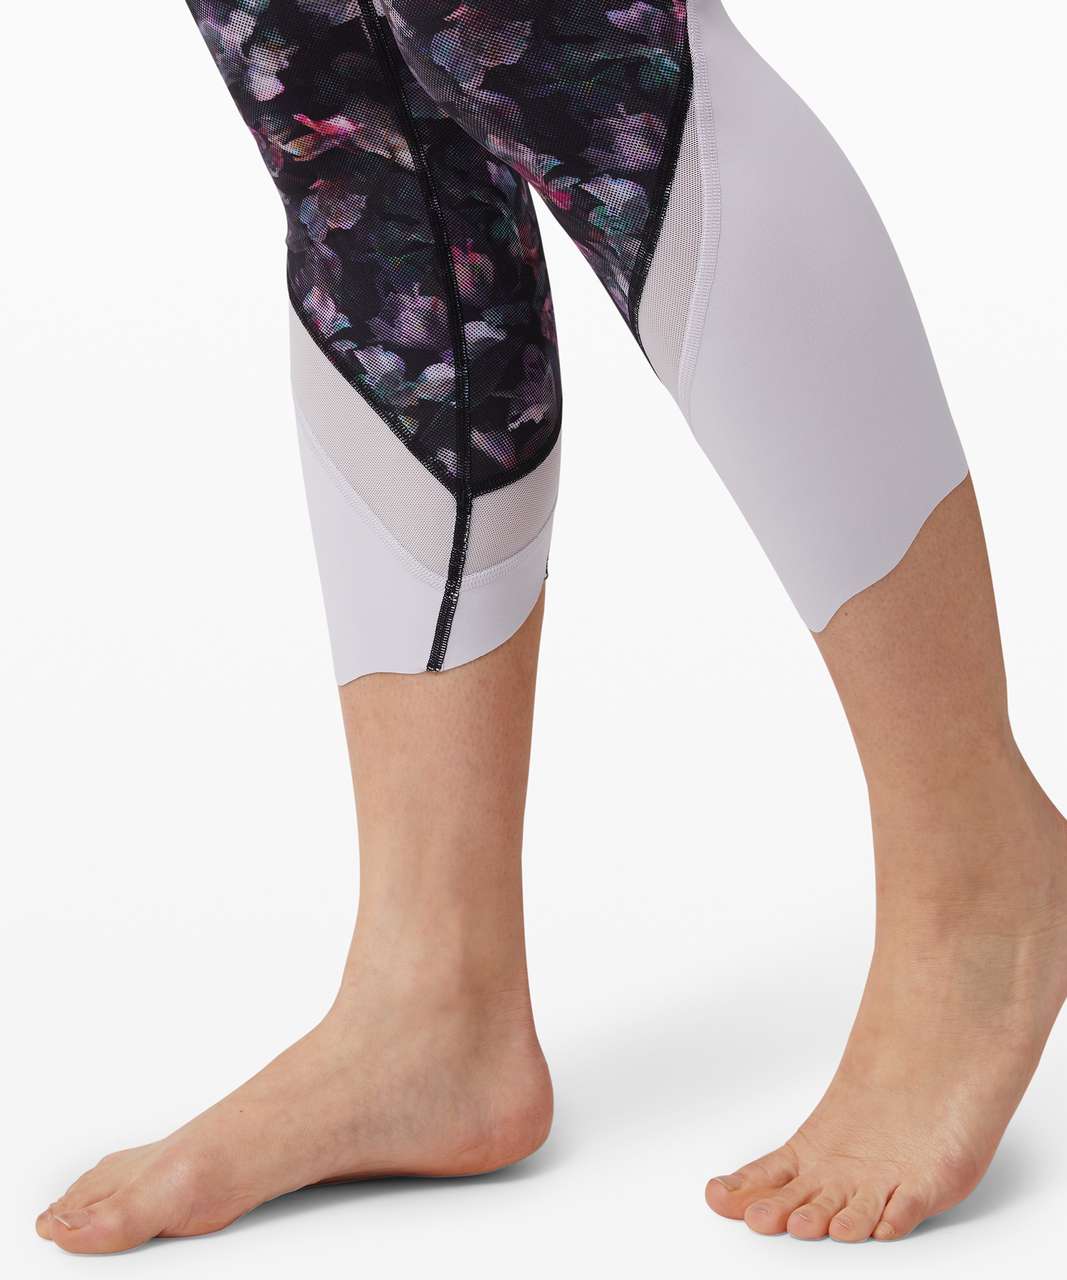 Lululemon Wunder Under Crop High-Rise *Roll Down Scallop Full-On Luxtreme 23" - Activate Floral Multi